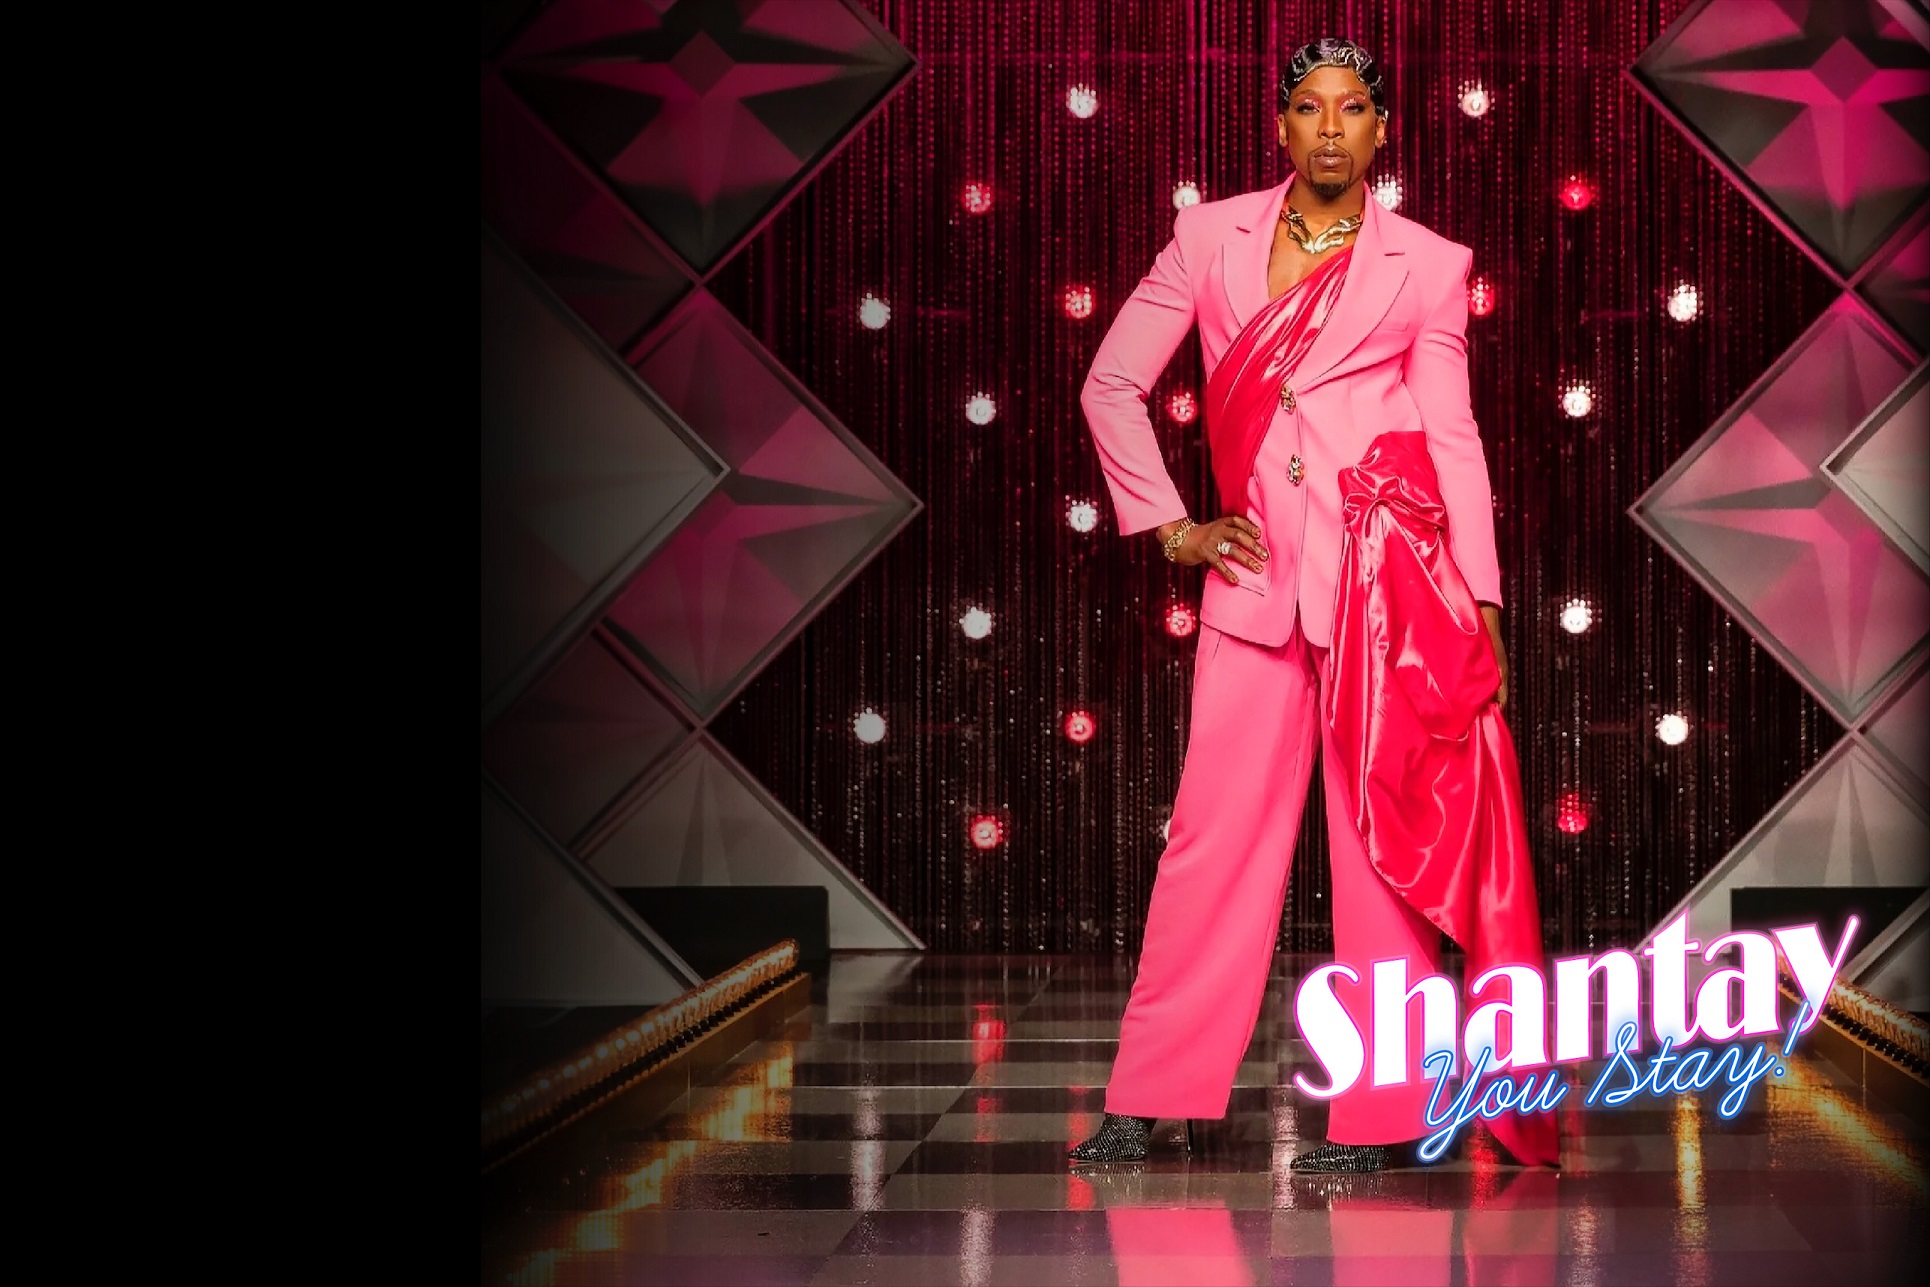 The image depicts a person in a vibrant pink suit standing confidently on a stage. The backdrop features star-shaped decorations and twinkling lights. The text “Shantay You Stay” is displayed at the bottom.